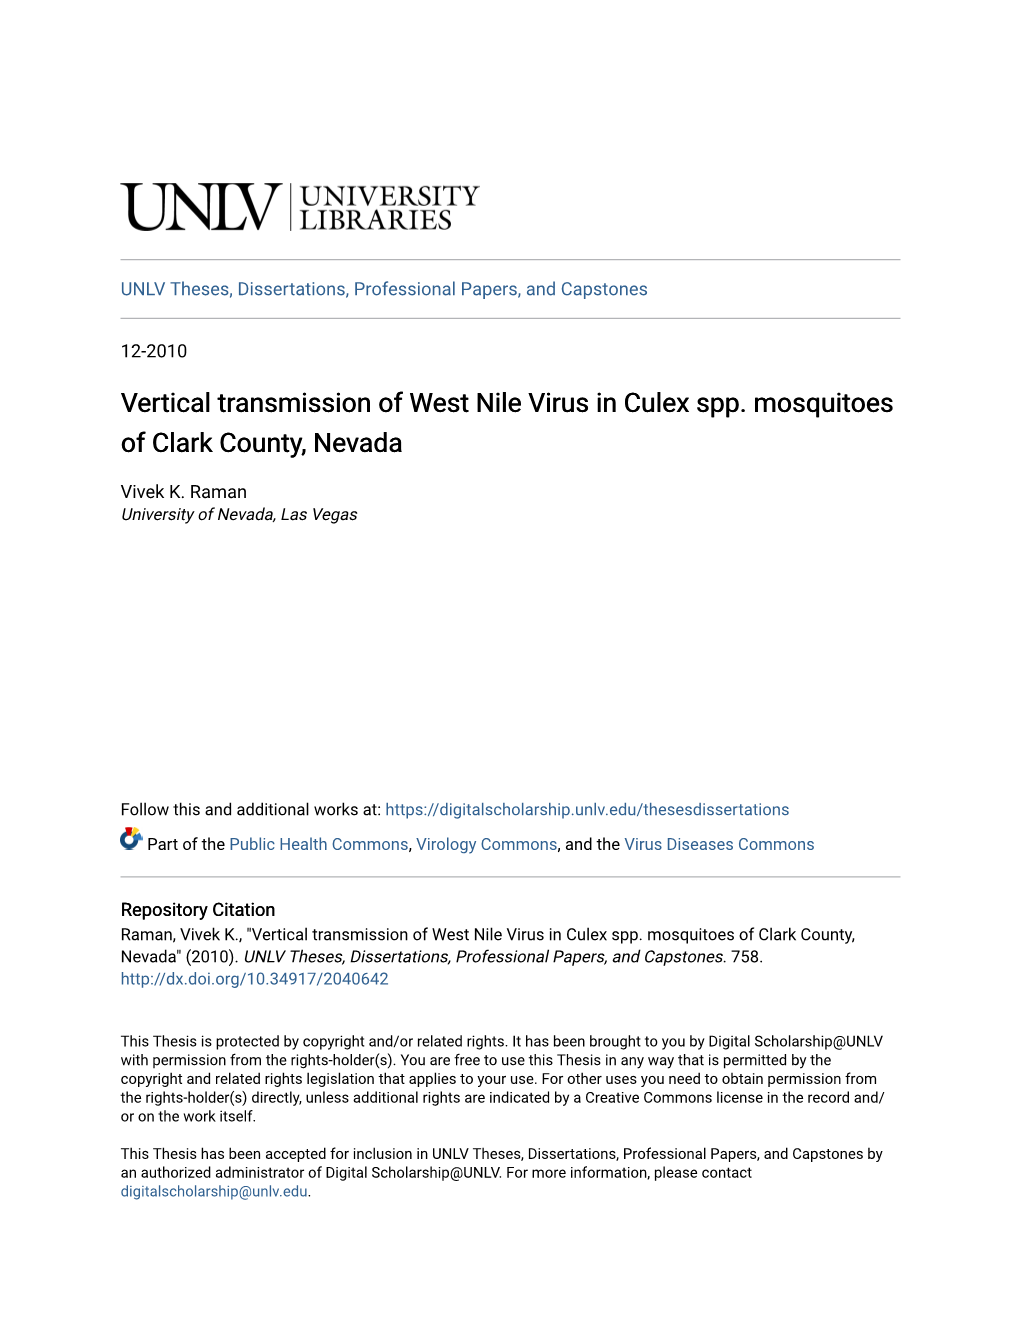 Vertical Transmission of West Nile Virus in Culex Spp. Mosquitoes of Clark County, Nevada